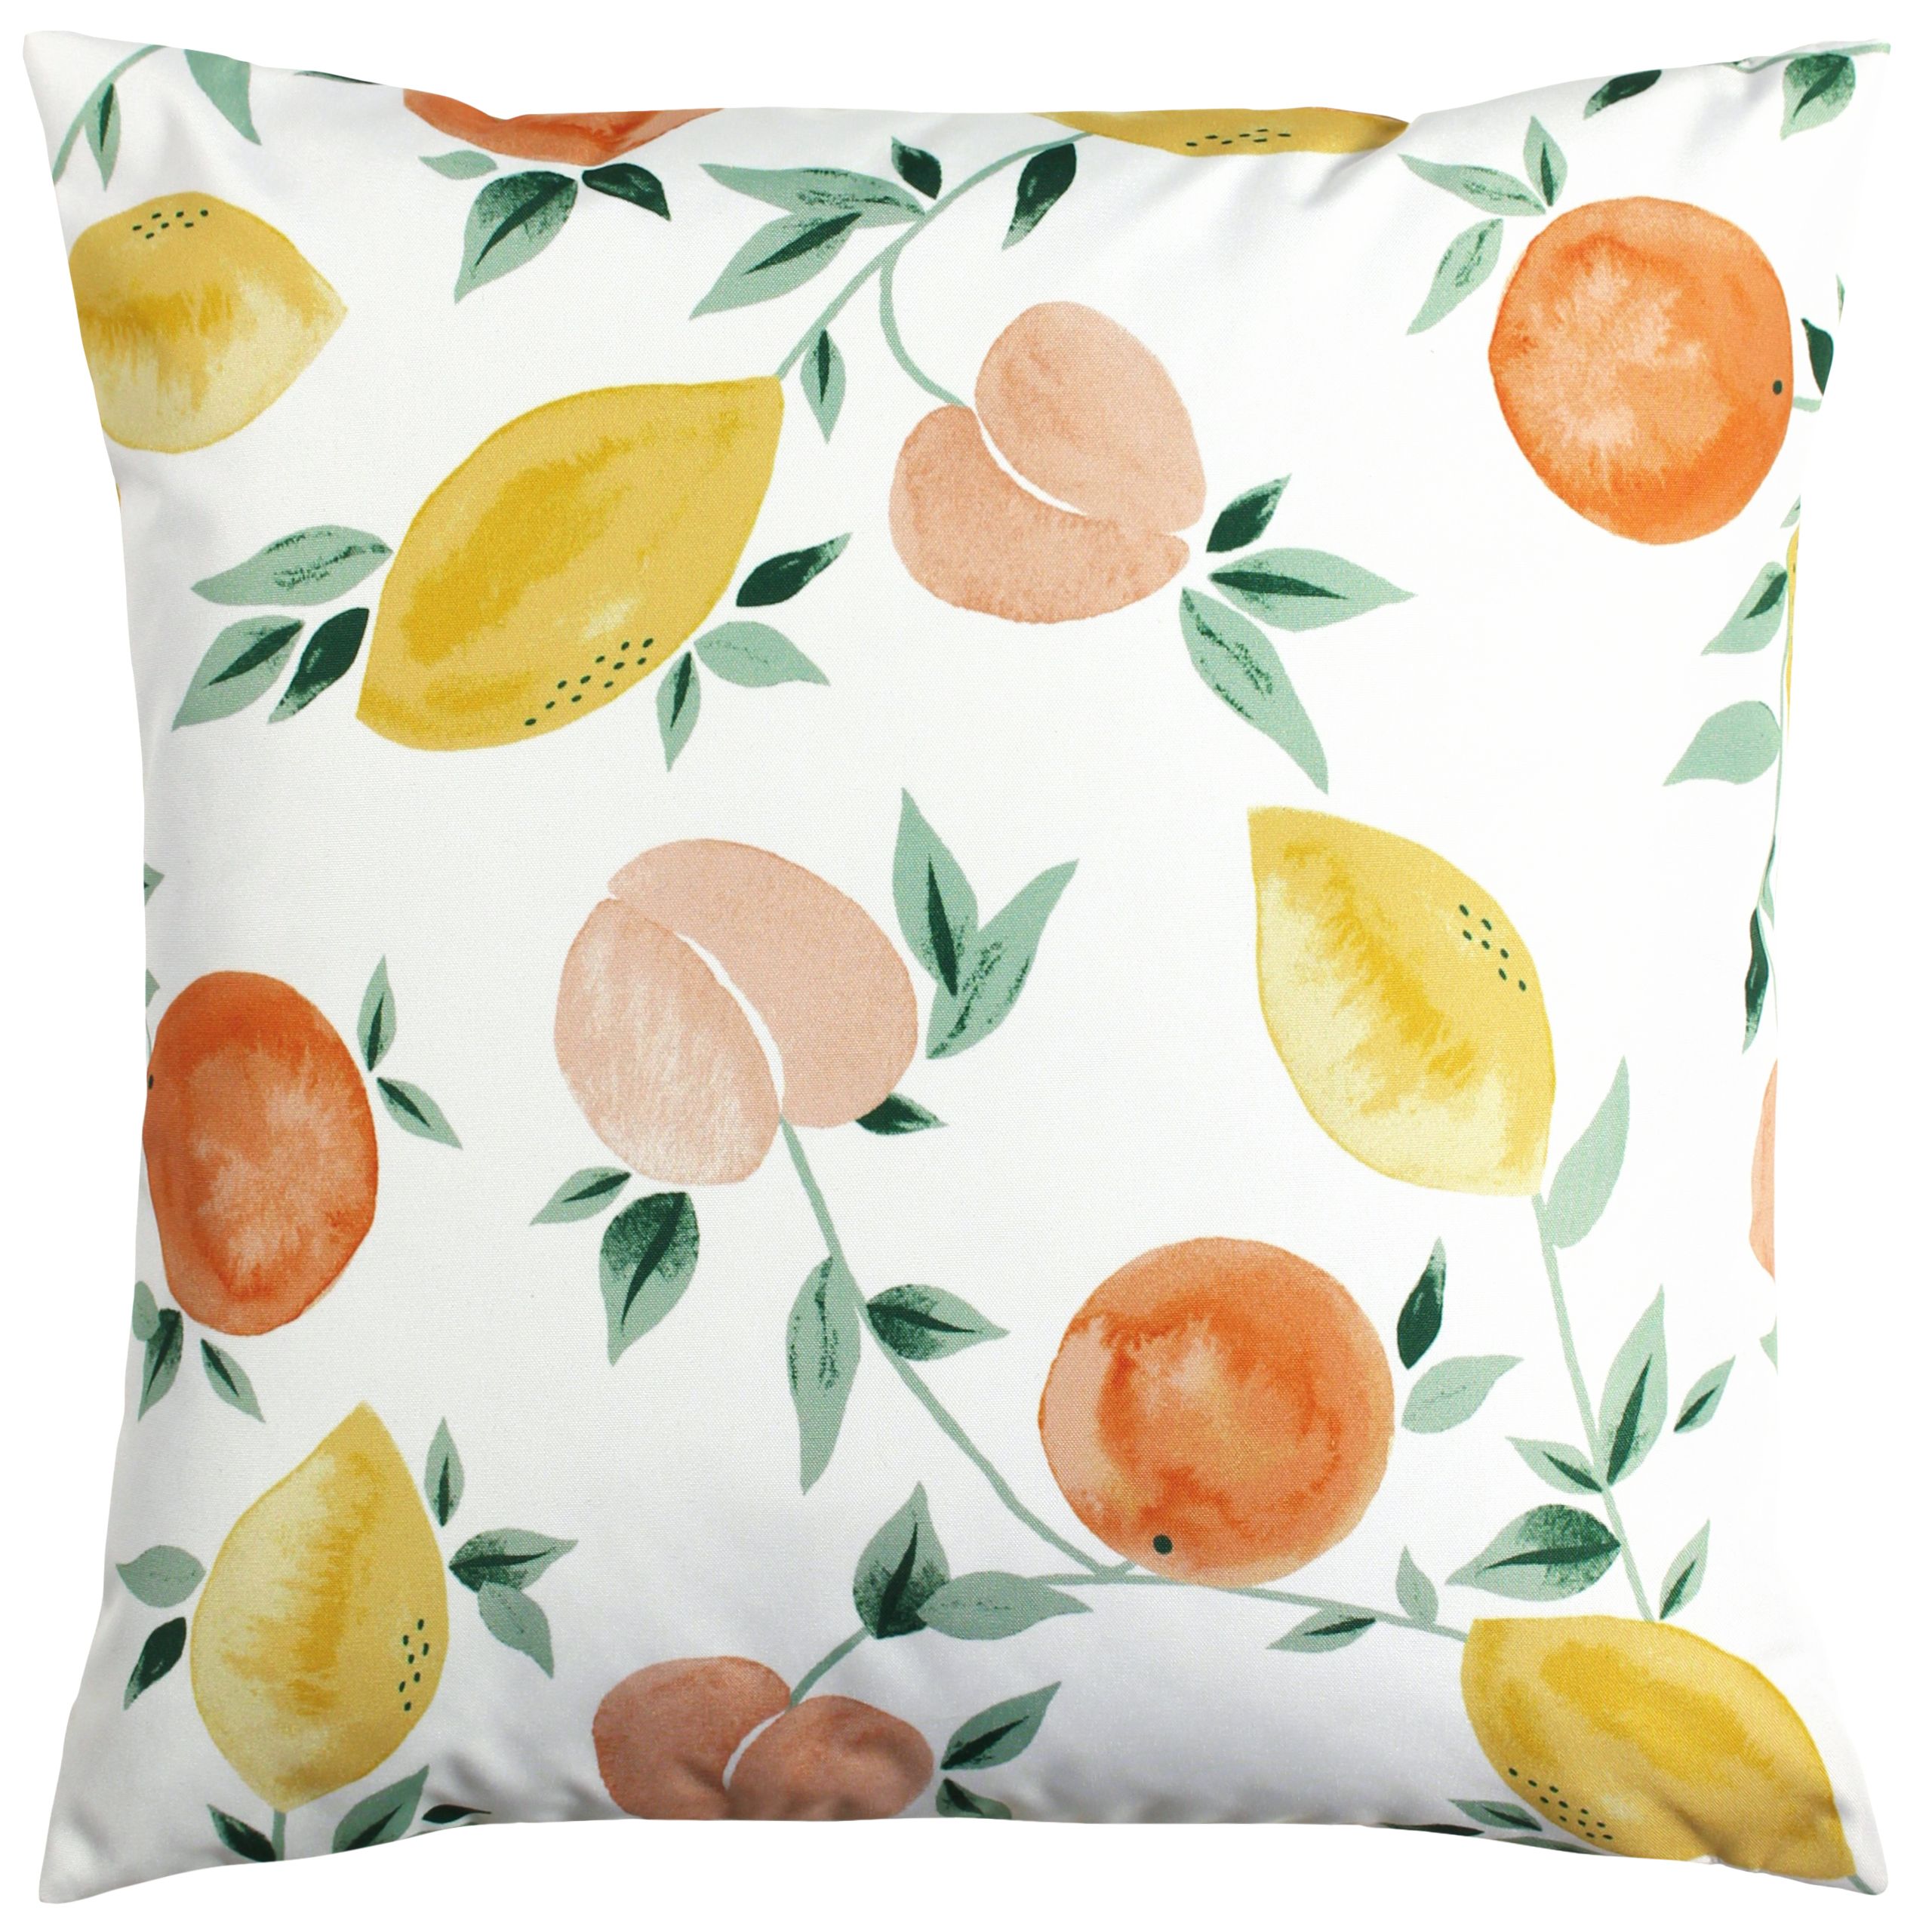 Add a pop of colour to you garden this summer. Featuring a bold watercolour print of seasonal fruits, this cushion is the perfect accompaniment for that outdoor experience.